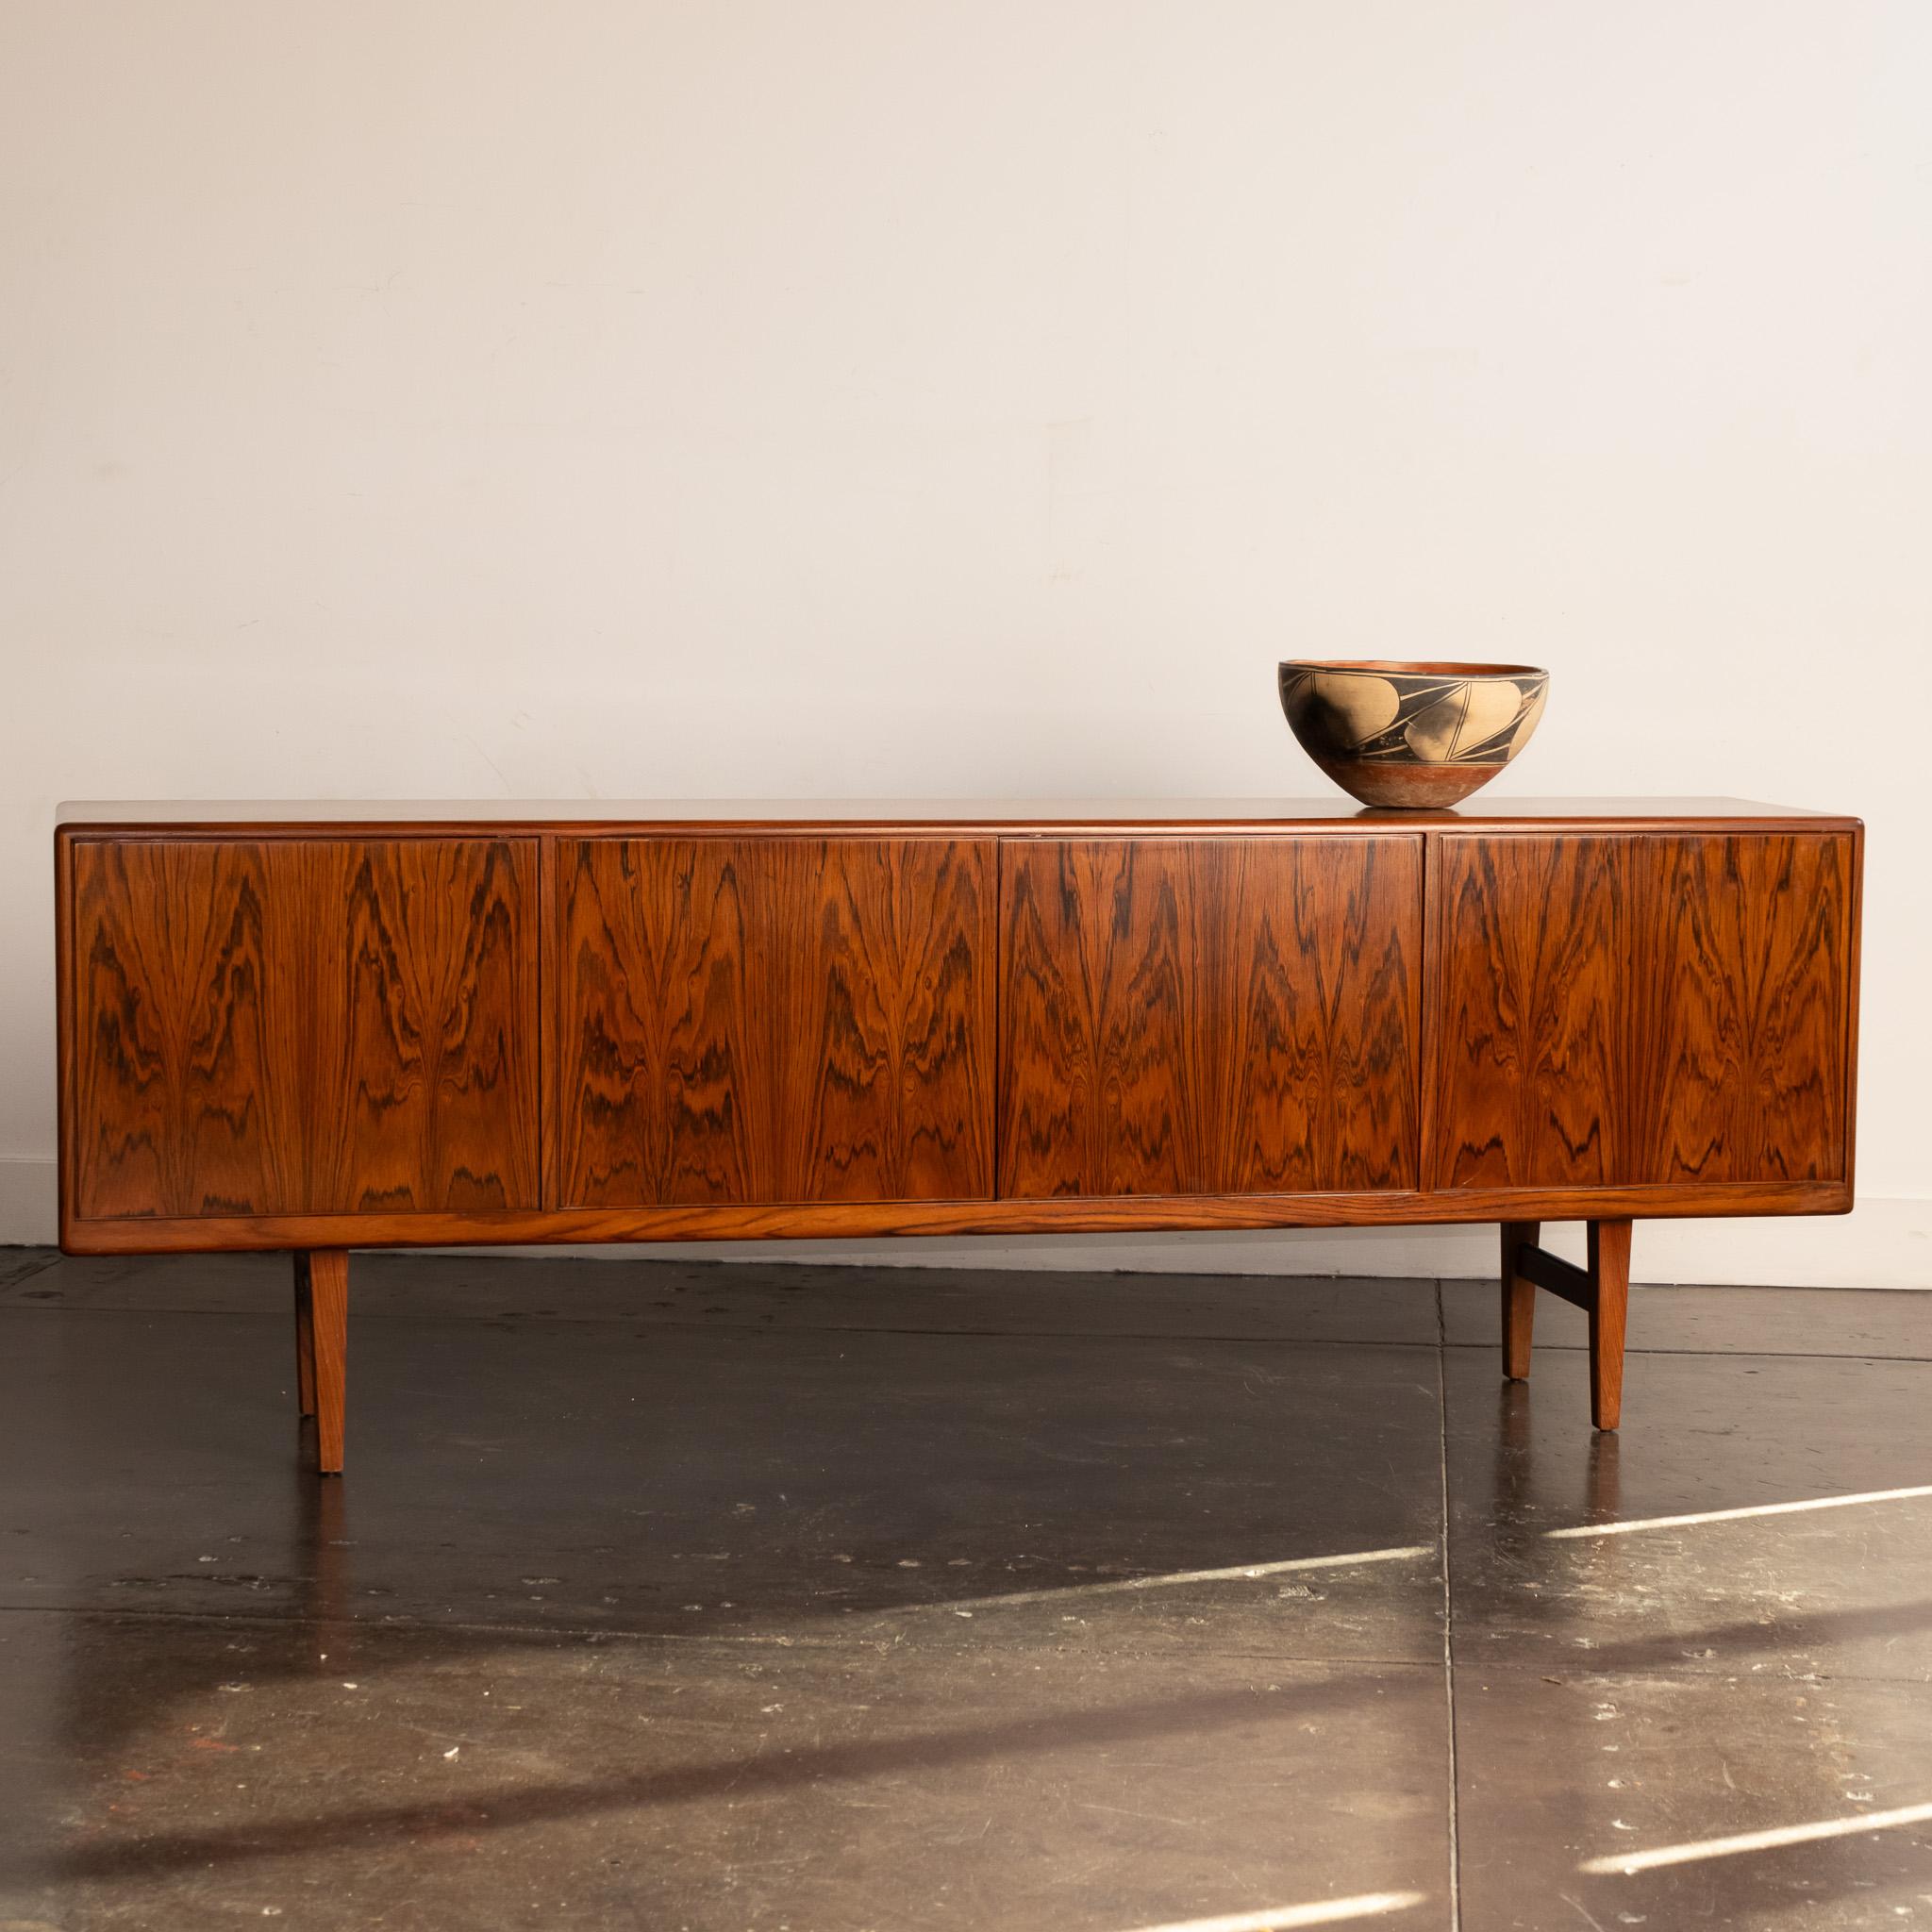 A beautifully executed rosewood credenza by Robert Heritage, an industrial and interior designer in England in the 50s and 60s.  This is a classic example of his work, which featured simple, classic lines and employed beautifully grained woods.